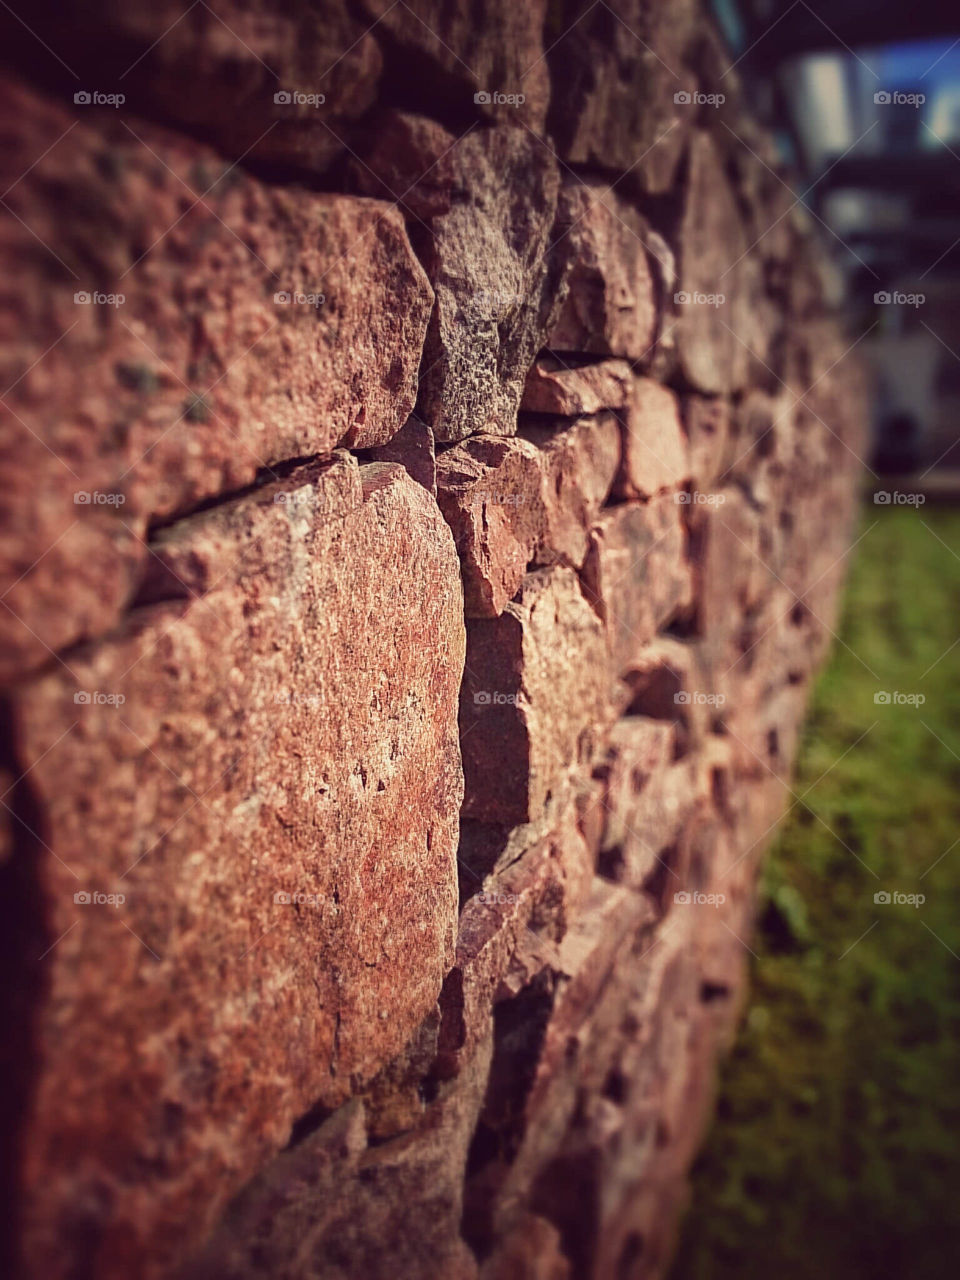 Stonewall

Captured with Sony Xperia Z Ultra and developed in Snapseed.